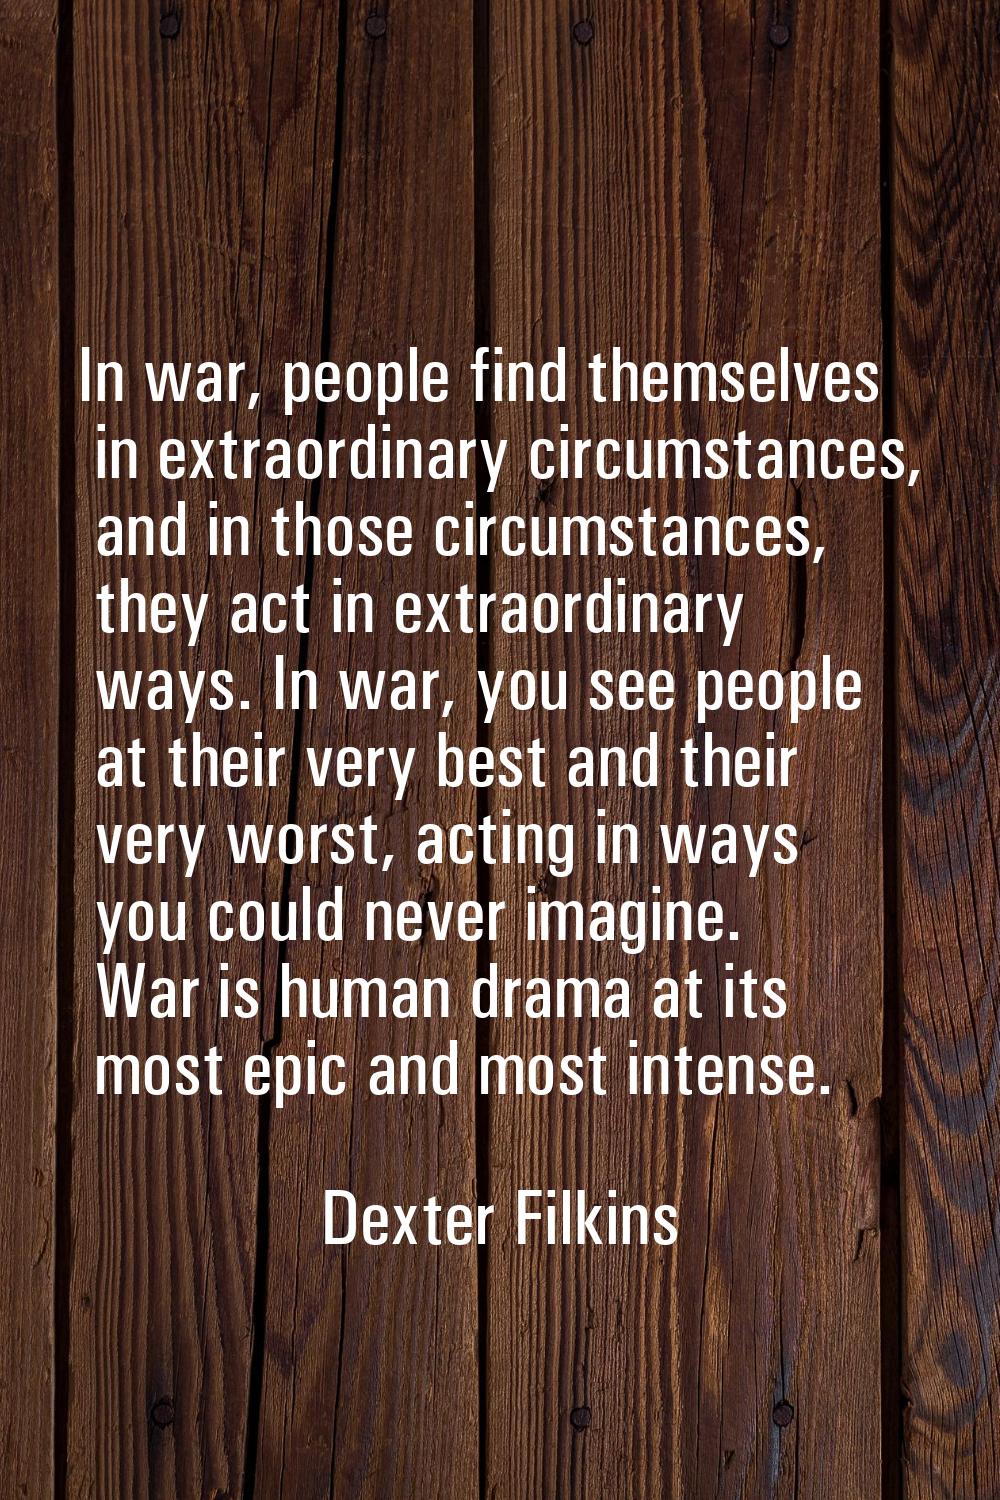 In war, people find themselves in extraordinary circumstances, and in those circumstances, they act